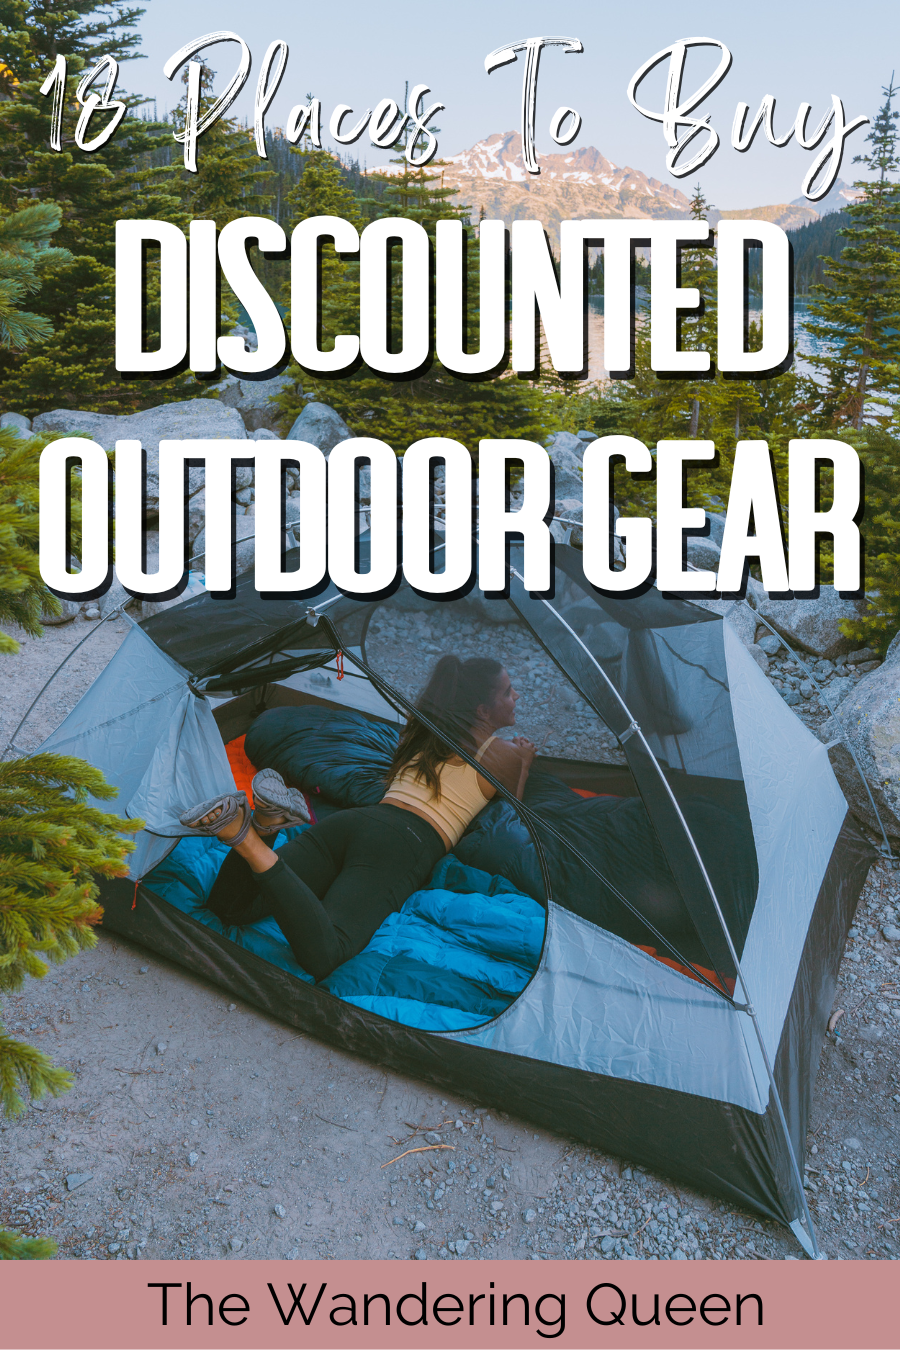 Discounted camping gear